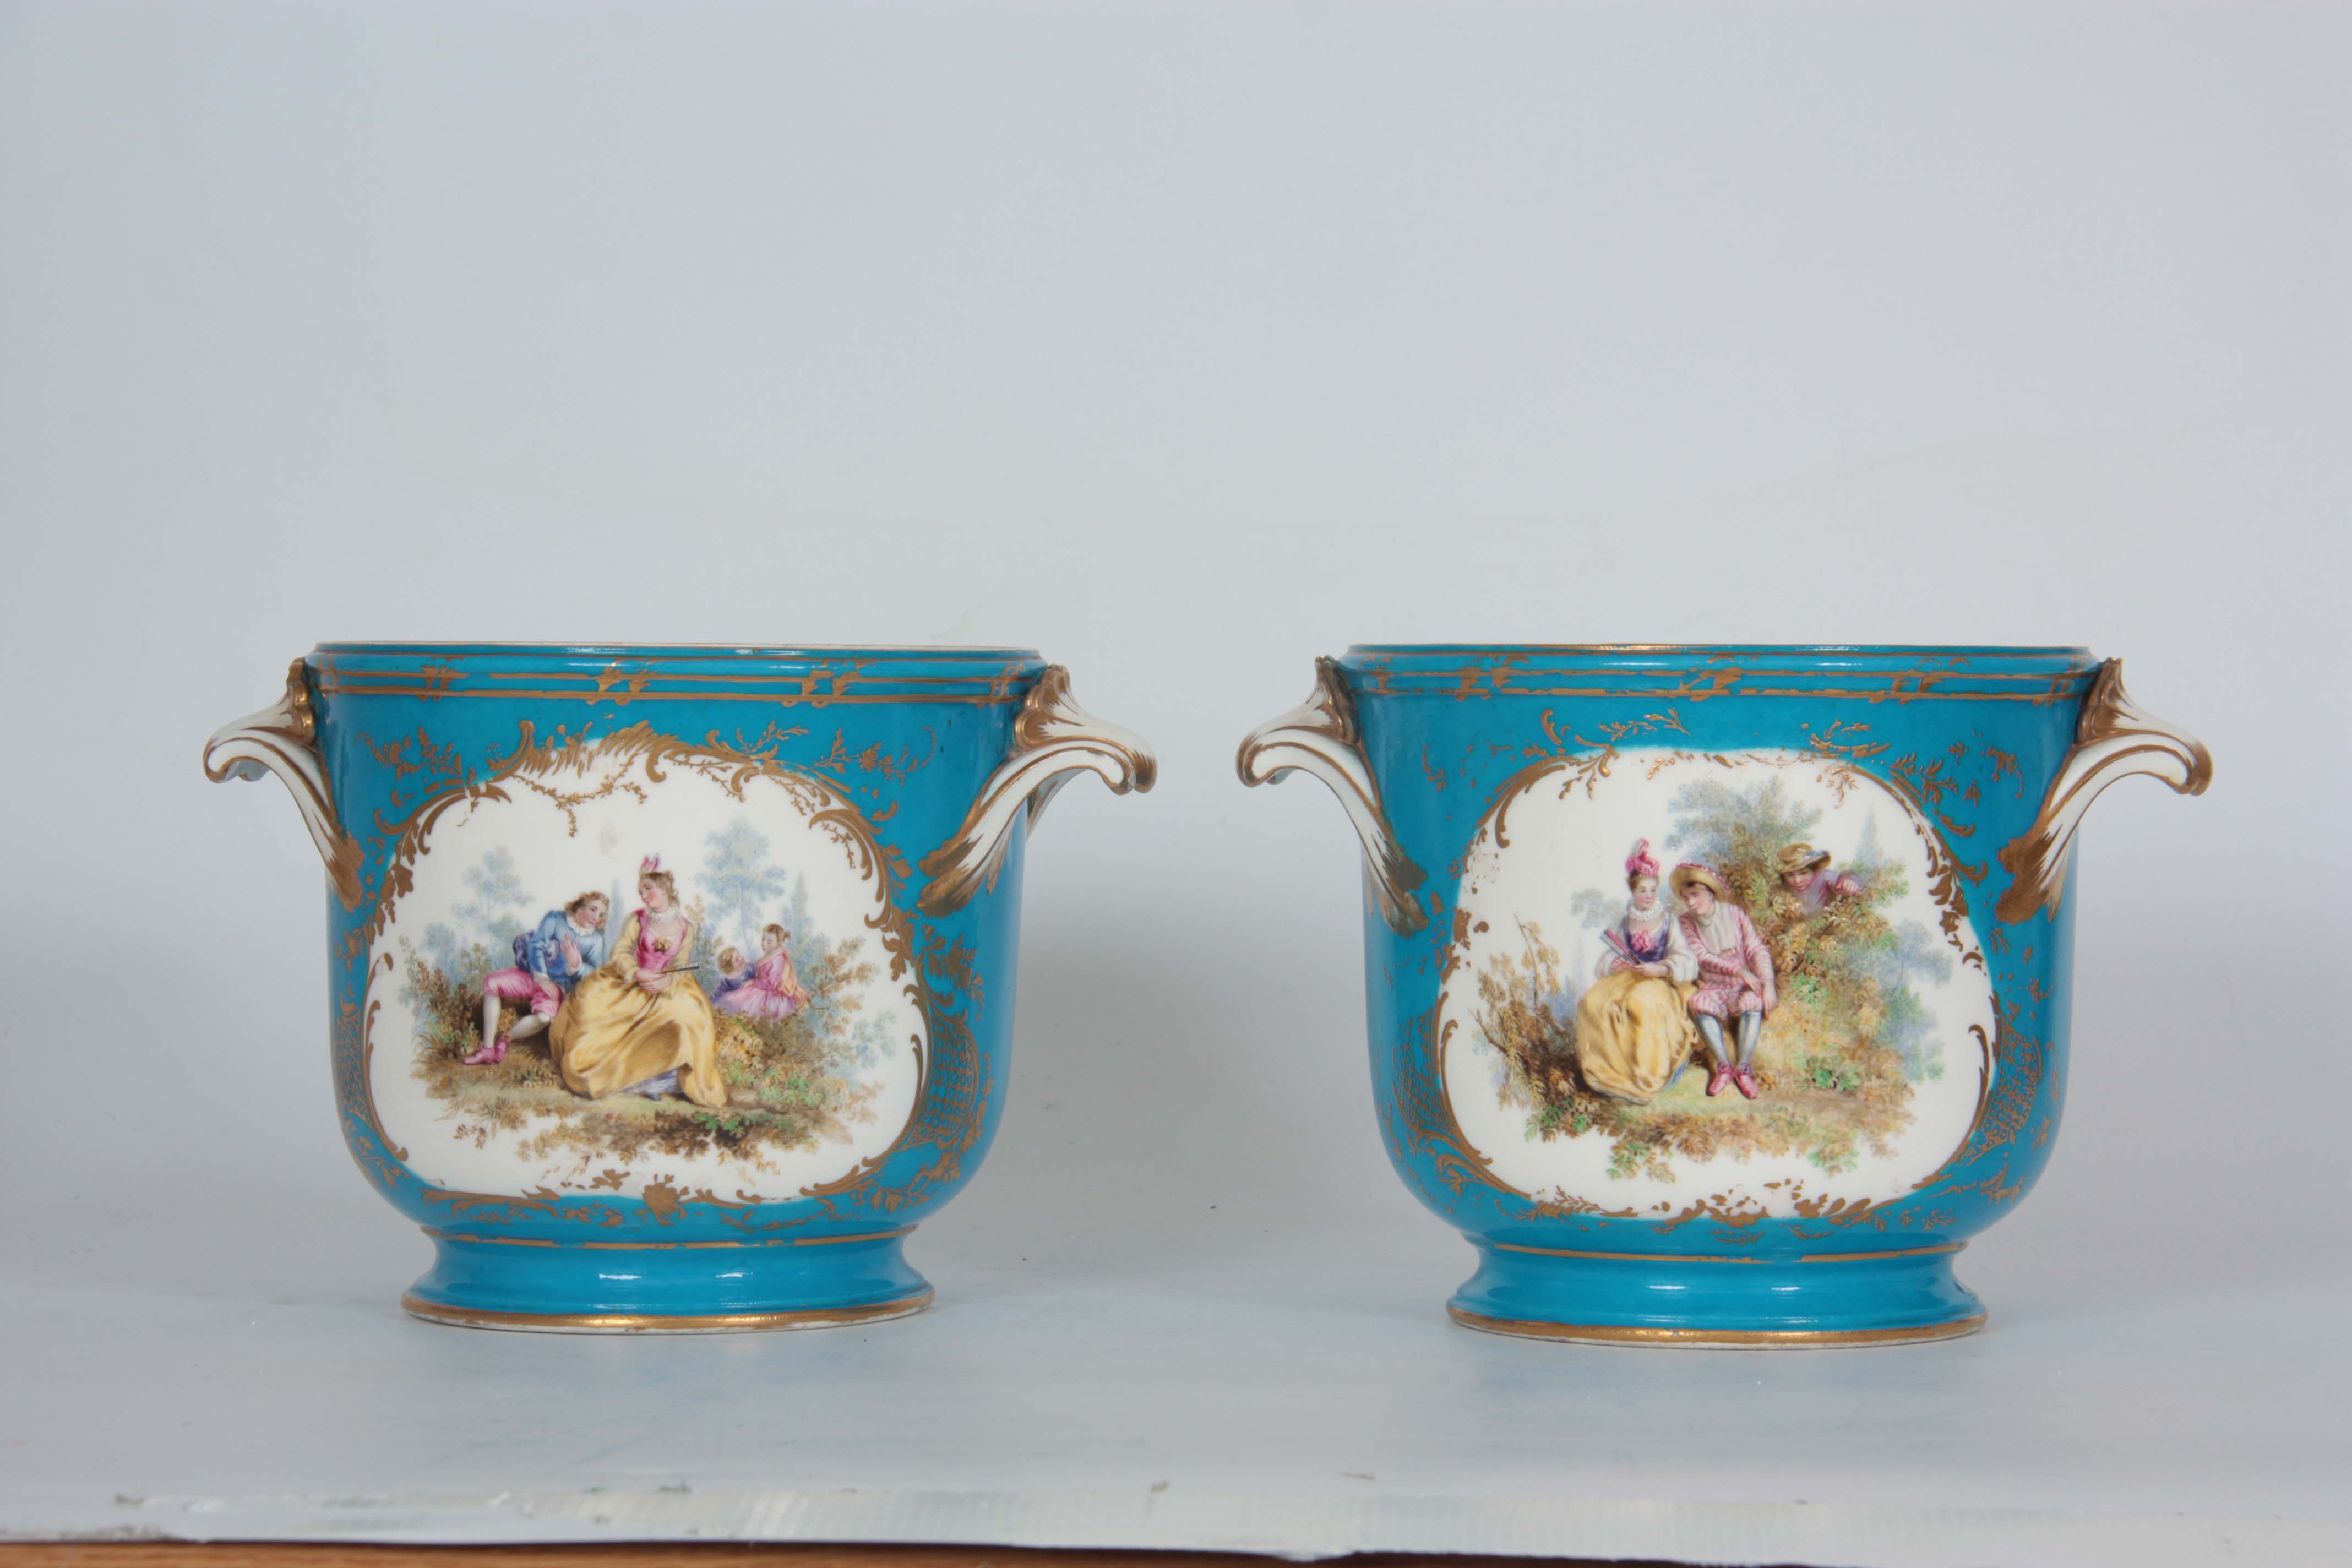 A PAIR OF 19TH CENTURY SEVRES PATTERN LARGE TWO-HANDLED JARDINIERES with gilt-edged leaf work - Image 2 of 9